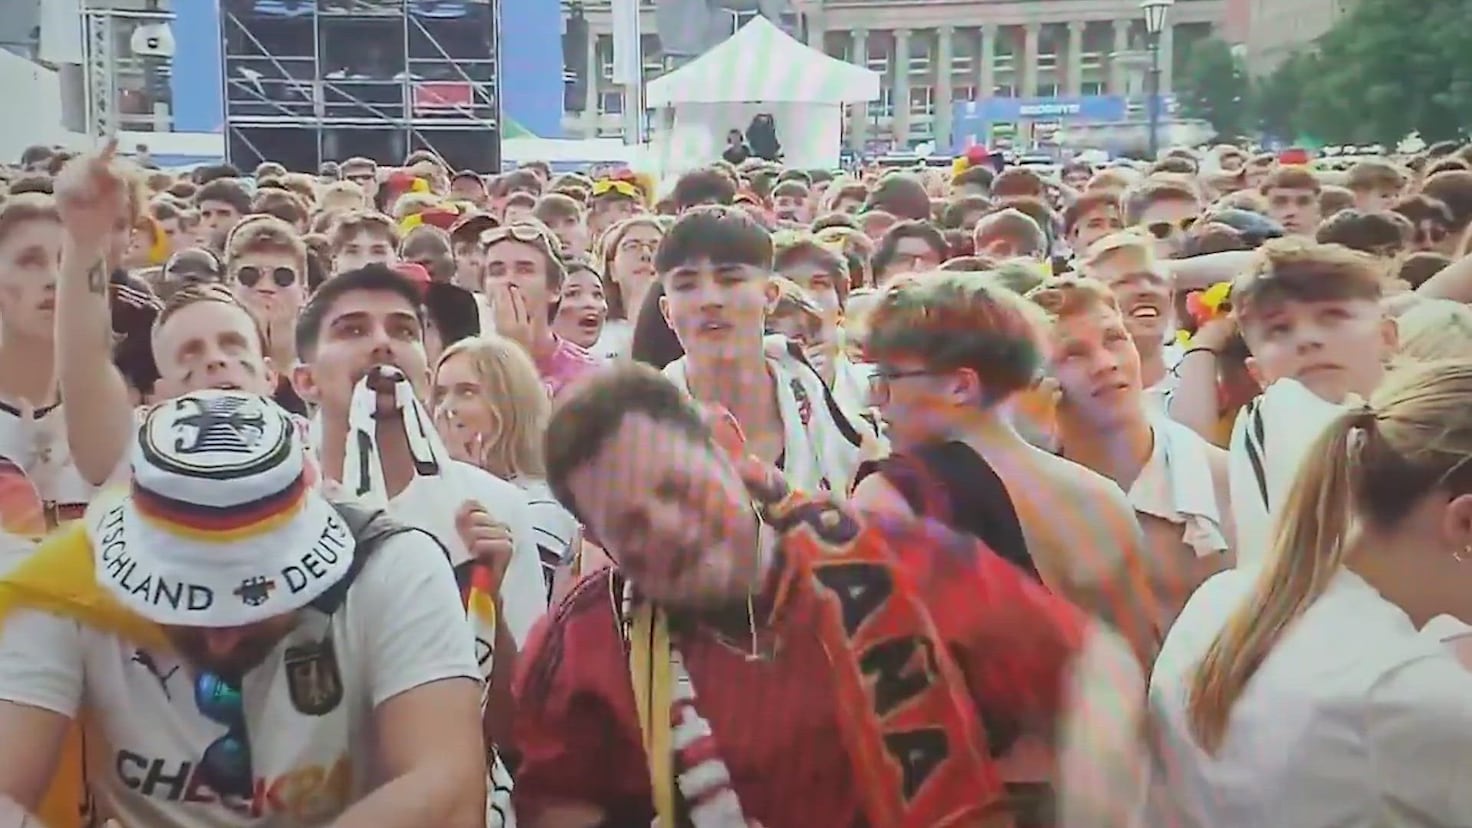 The Spanish fan who celebrated Spain's goal in the Fan Zone in Germany: I thought there would be Spaniards